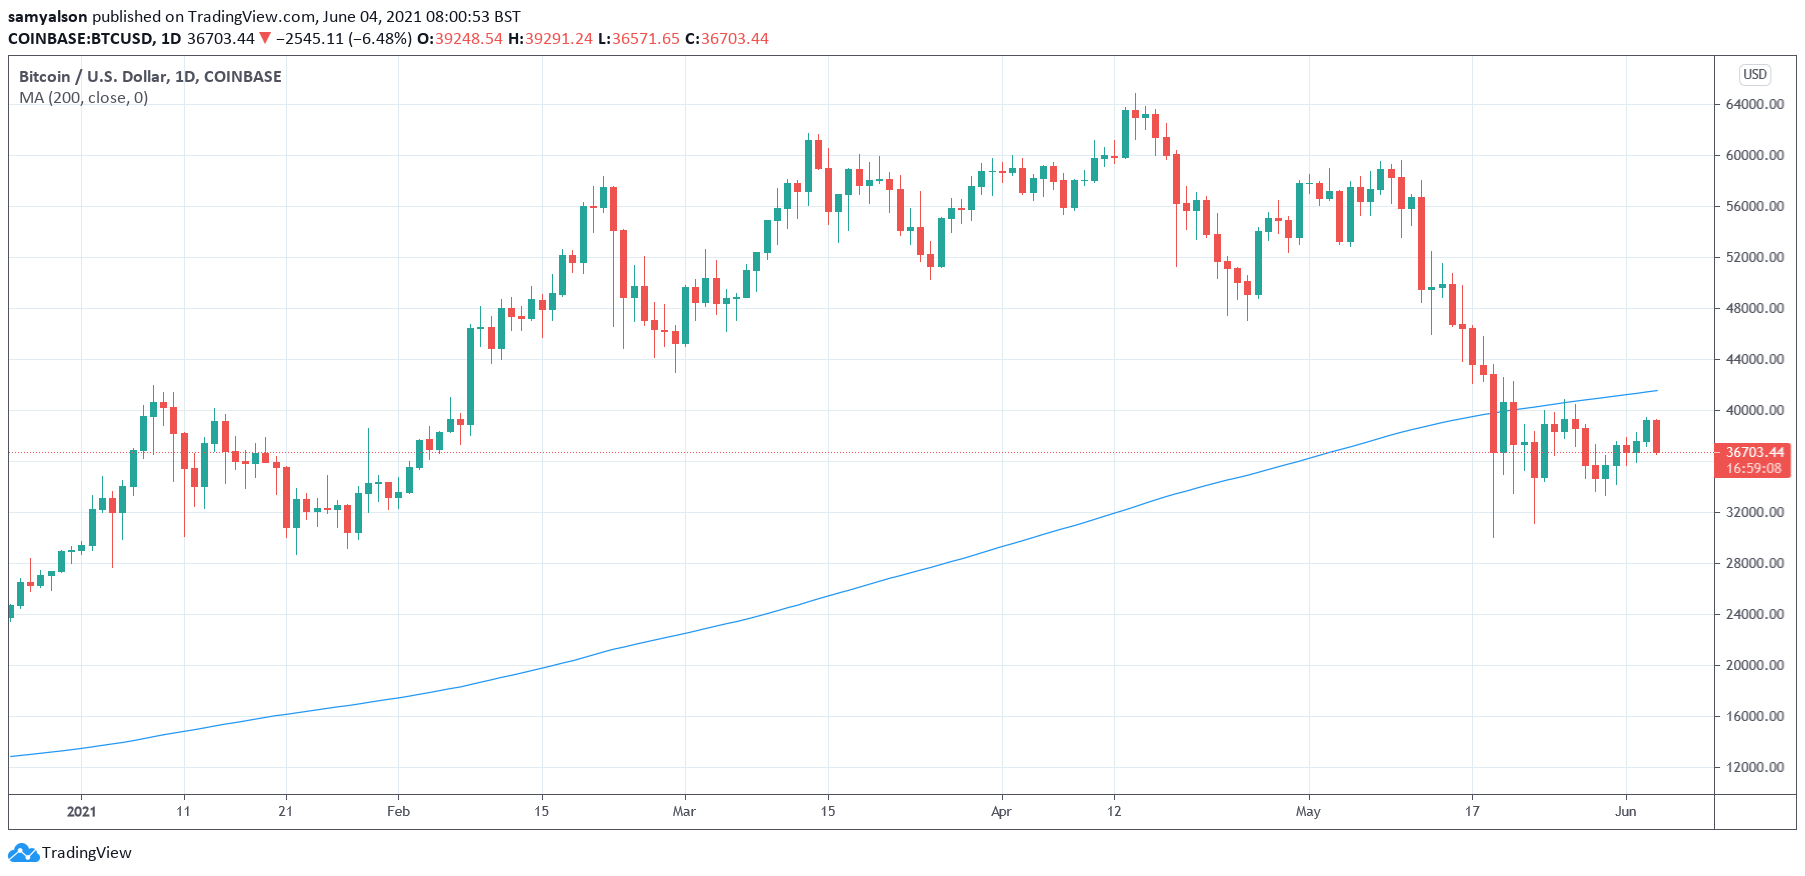 Bitcoin daily chart with 200-day MA